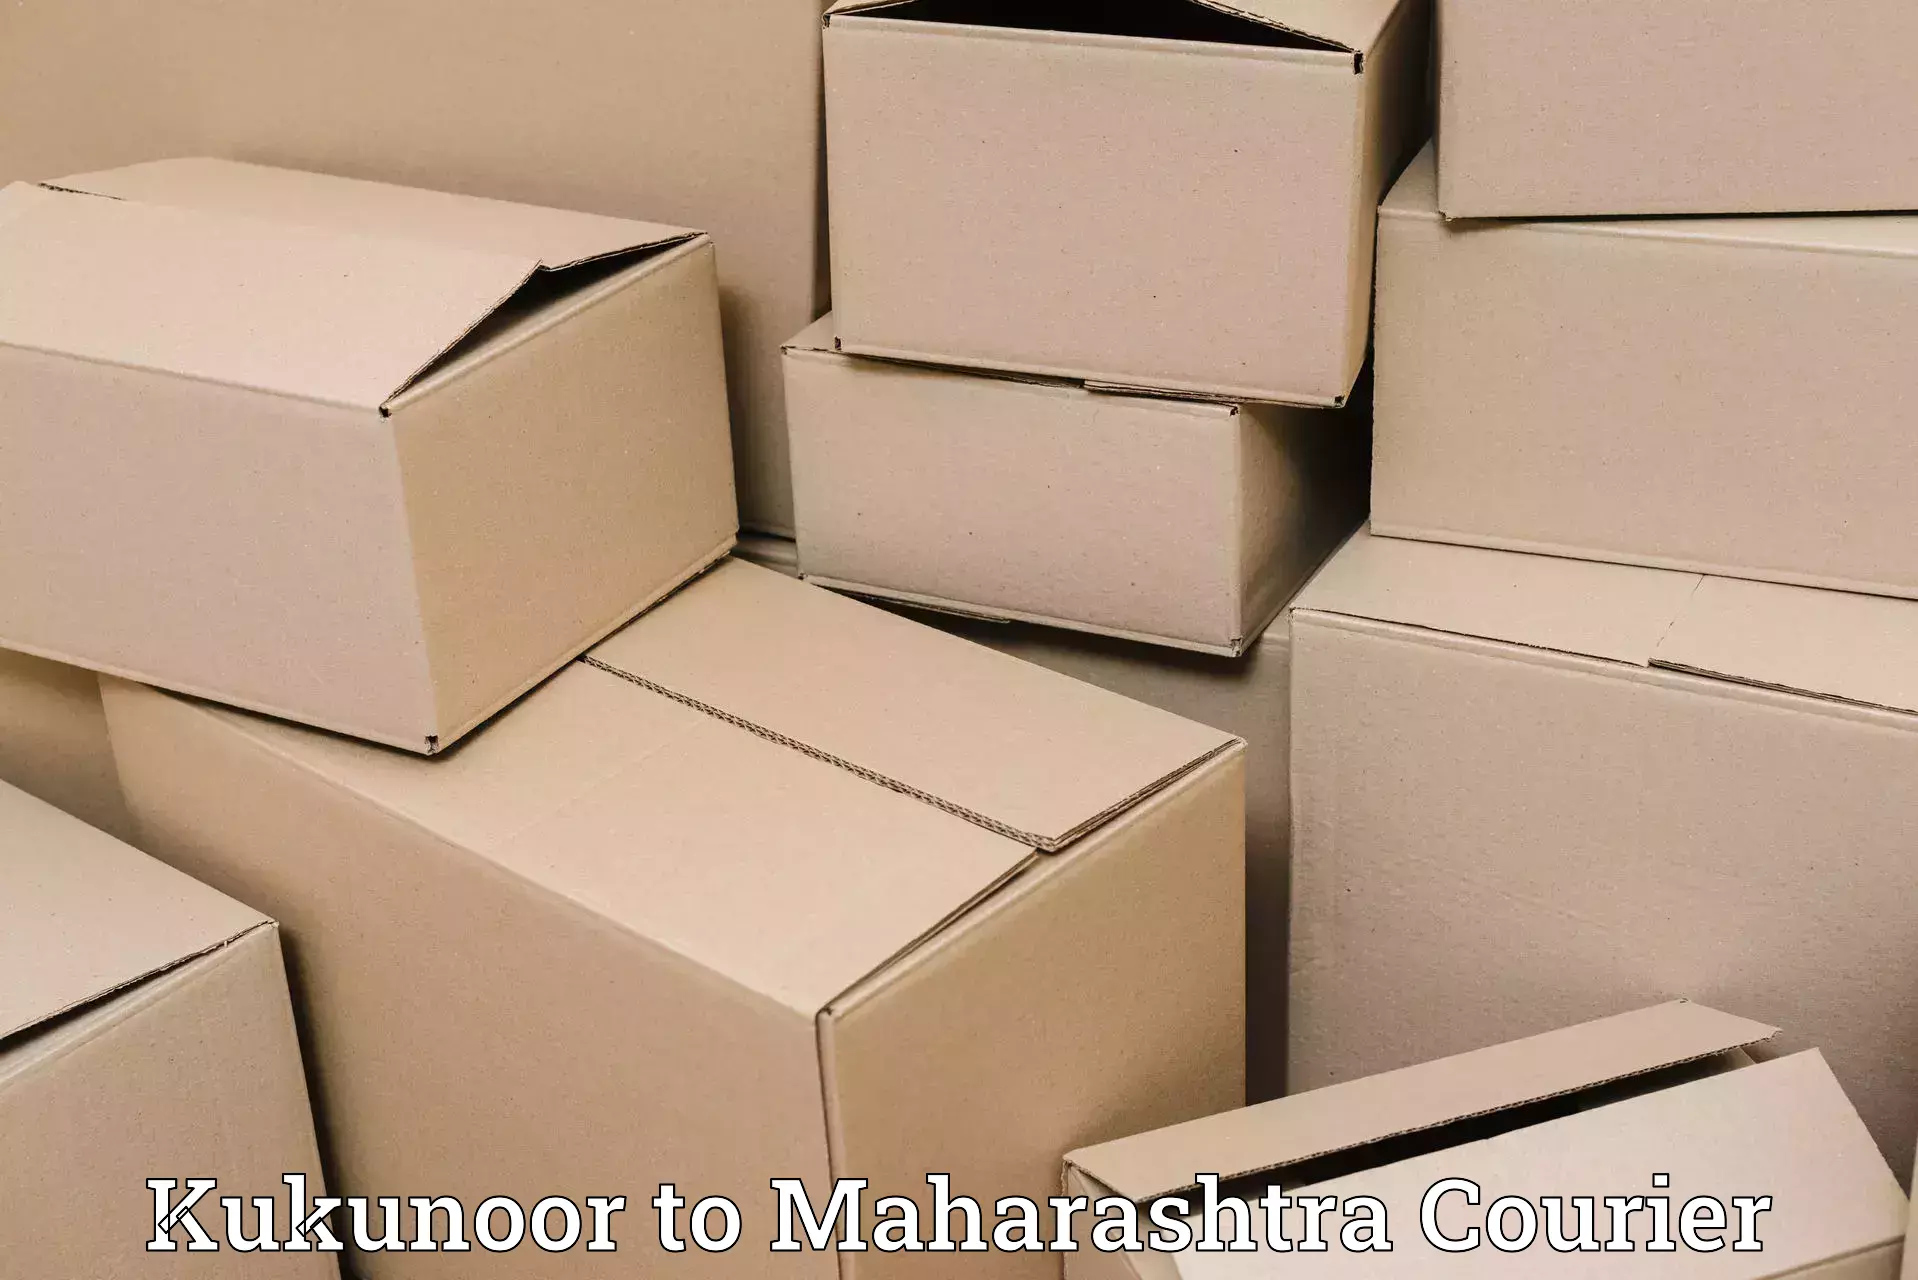 Cost-effective shipping solutions Kukunoor to DY Patil Vidyapeeth Pune